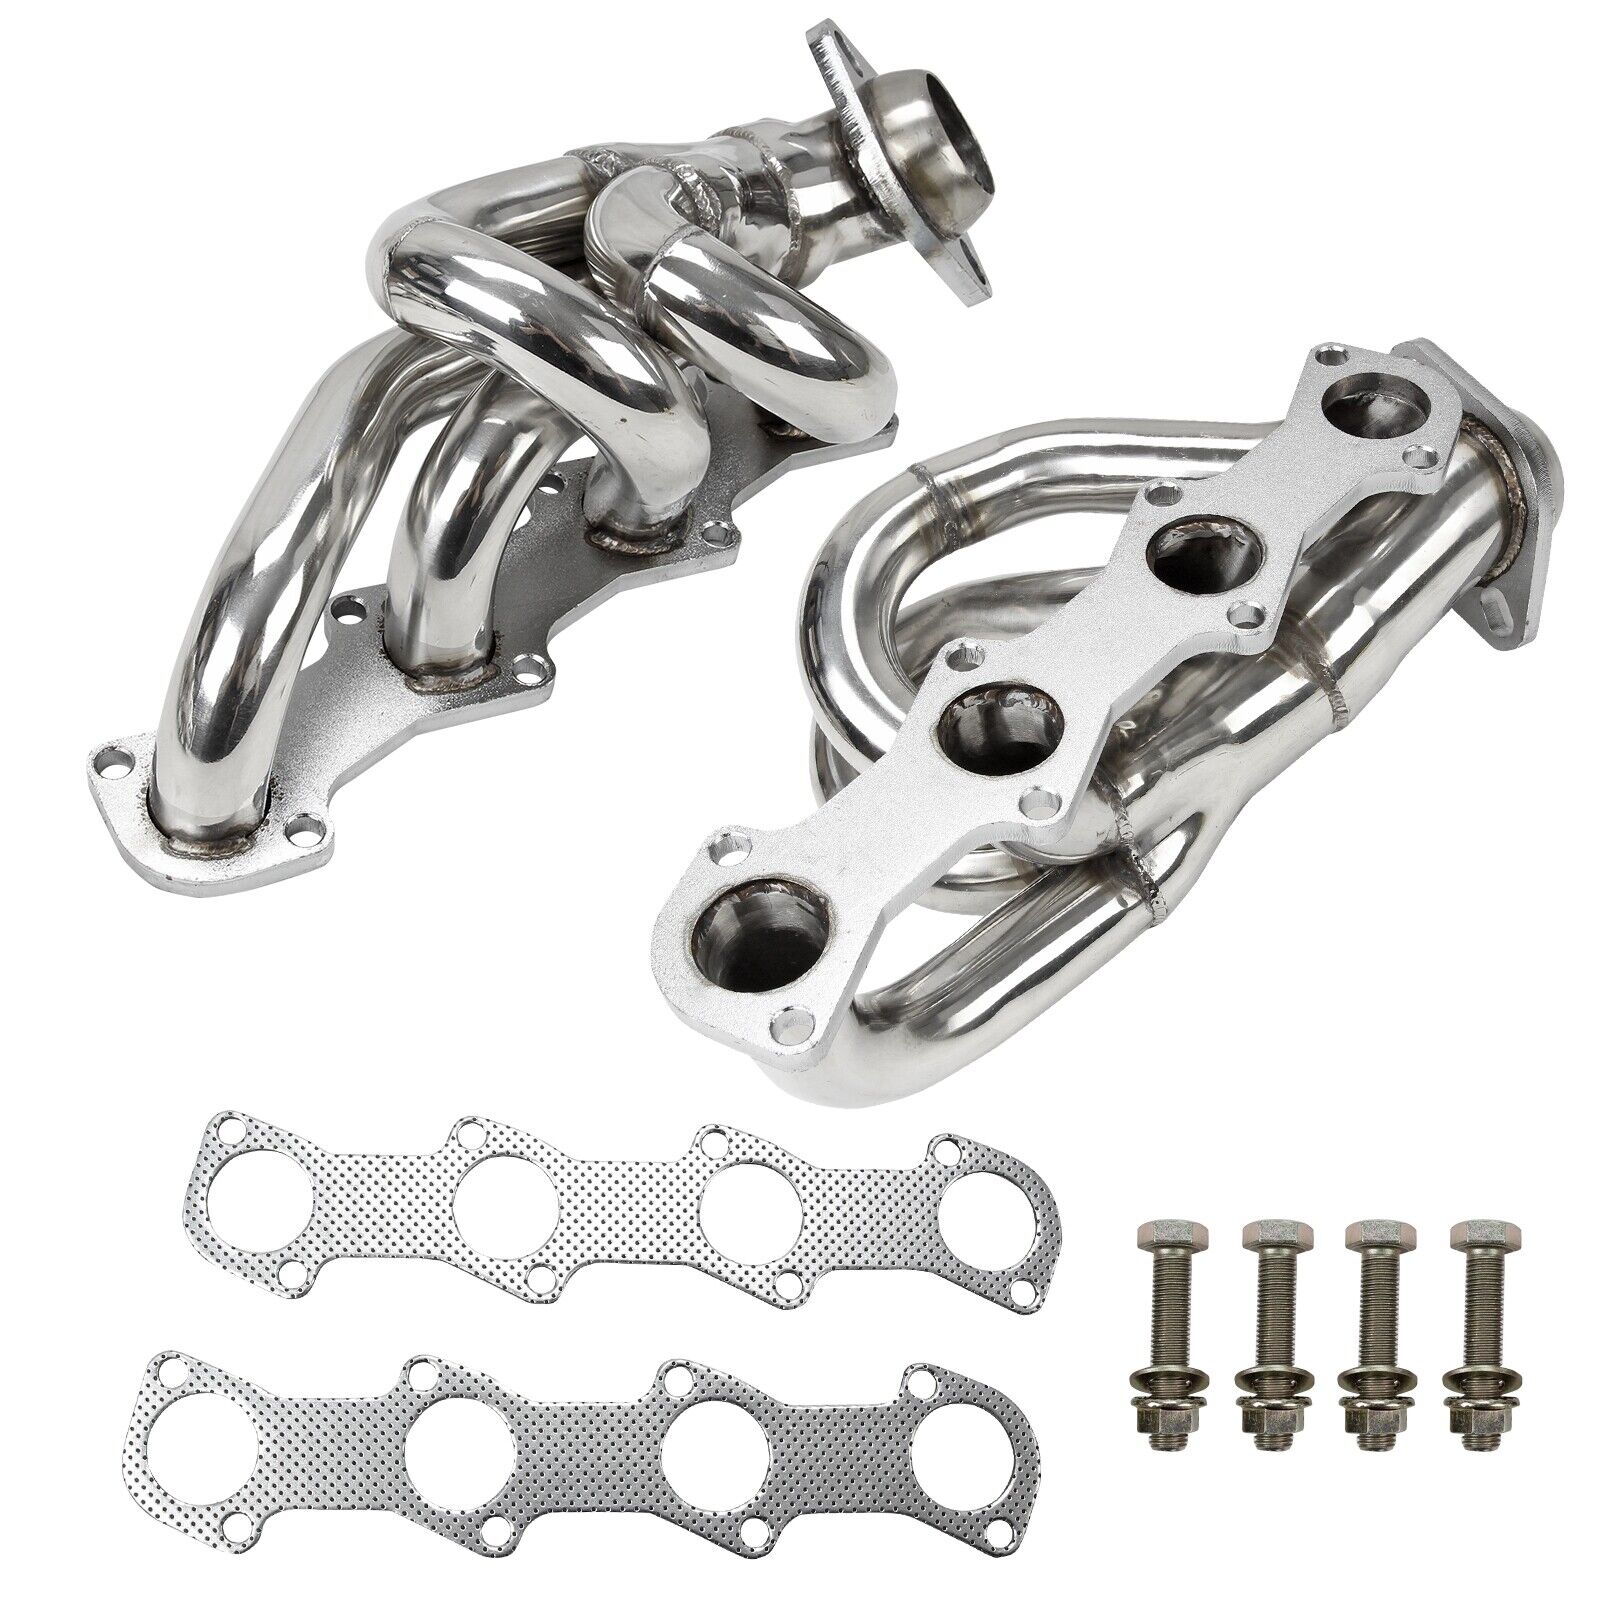 Fits Ford 1997-2003 F-150 F250 4.6L V8 Stainless Steel Shorty Manifold Header